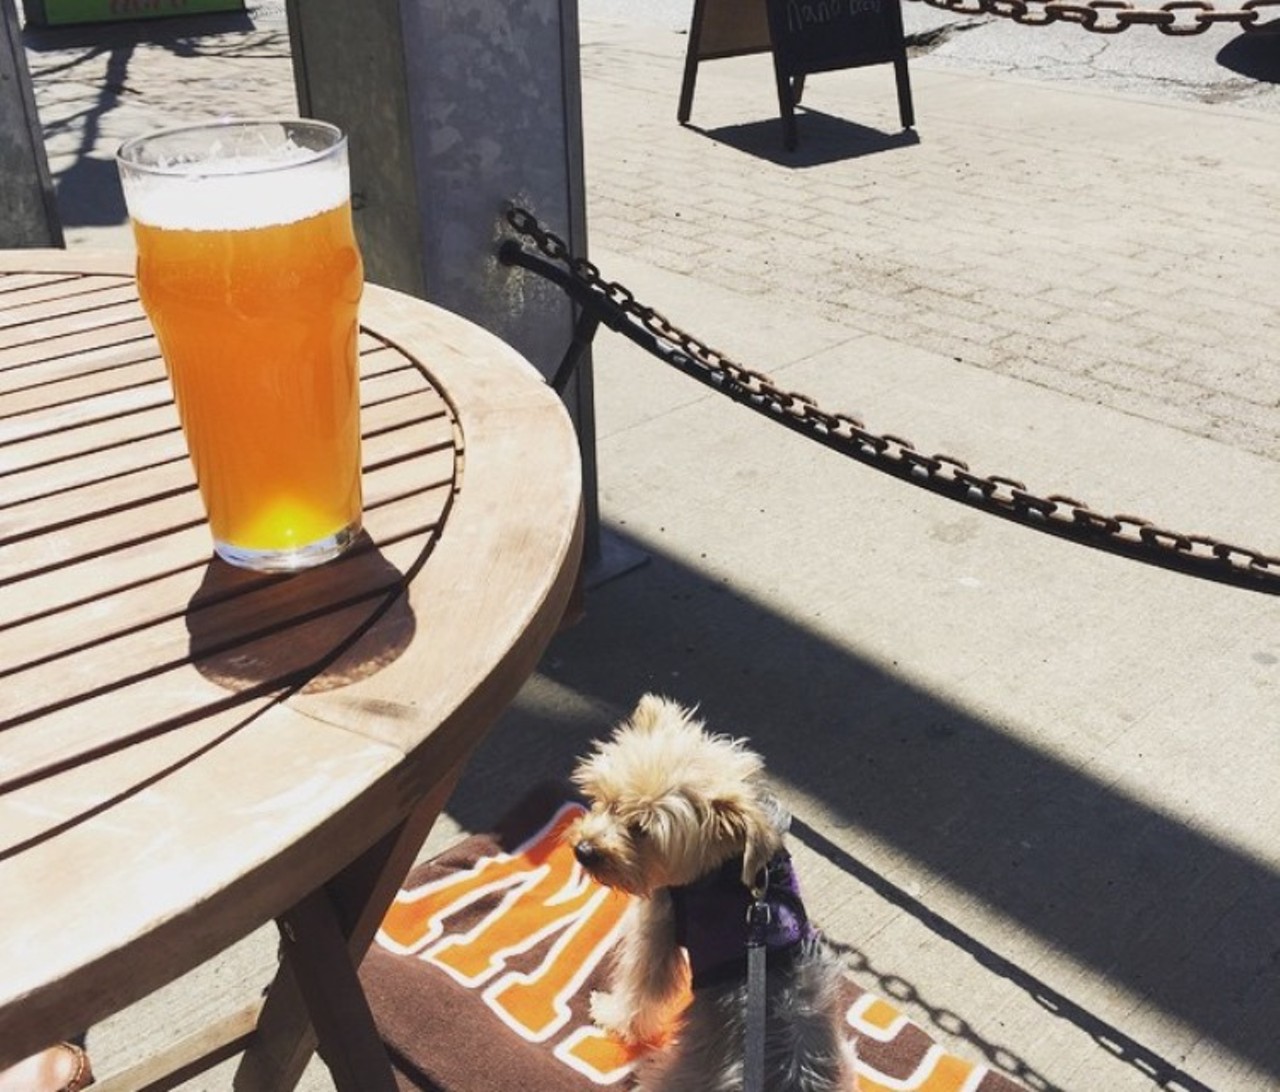 Nano Brew Cleveland
1859 W. 25th St. 
Spend time with your mutt at this local Cleveland outdoor beer garden bar just west of the city. 
(Photo courtesy of Instagram user: @Misskrause)